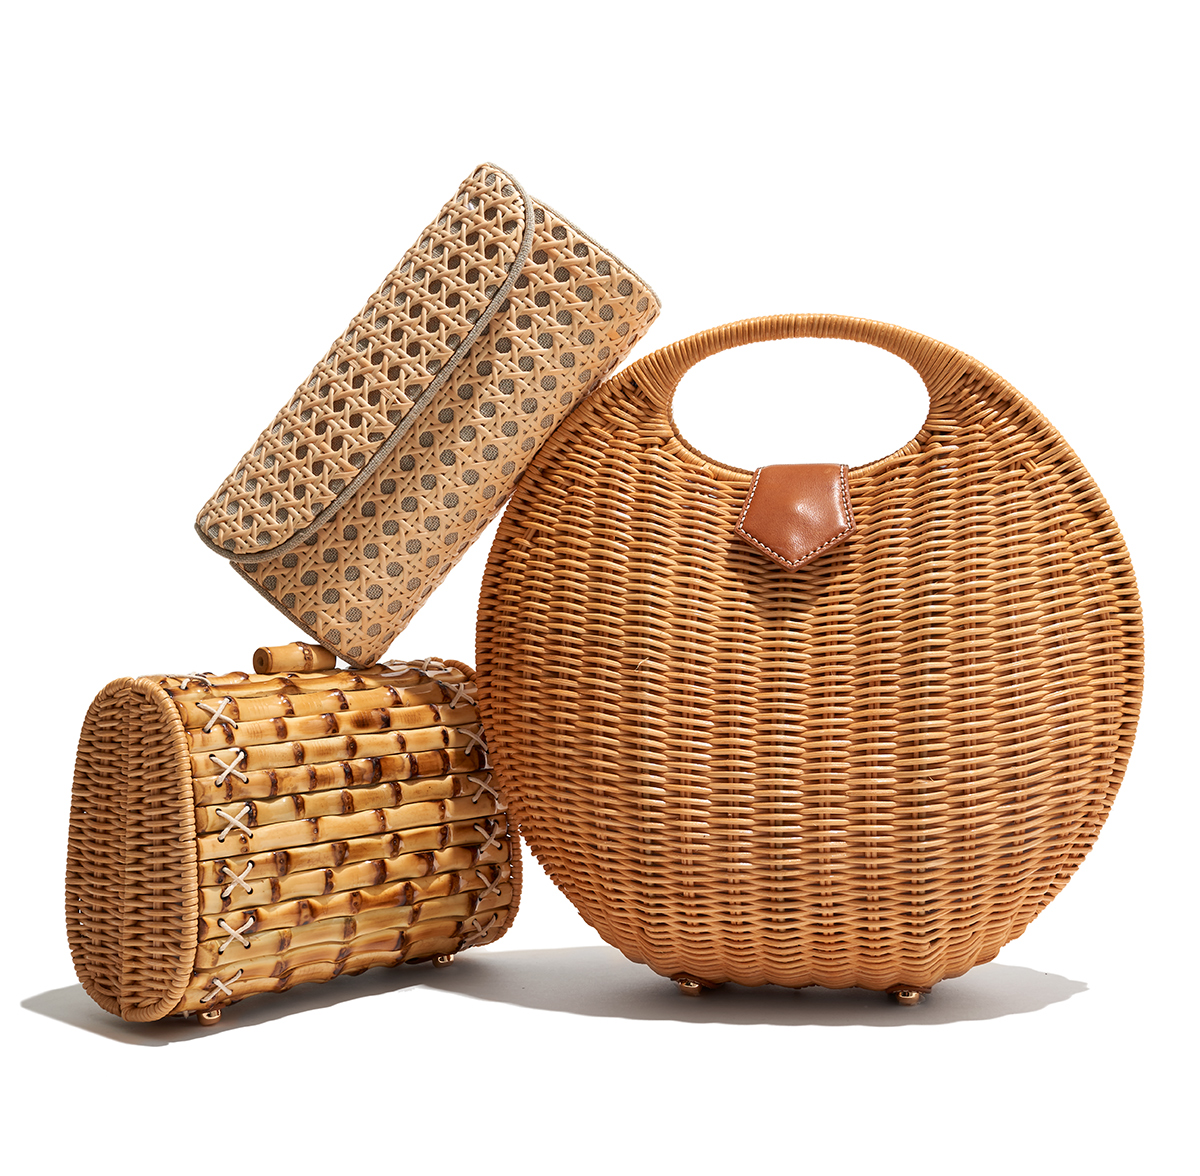 Straw fashion handbags on white background by Alison Gootee Photography 